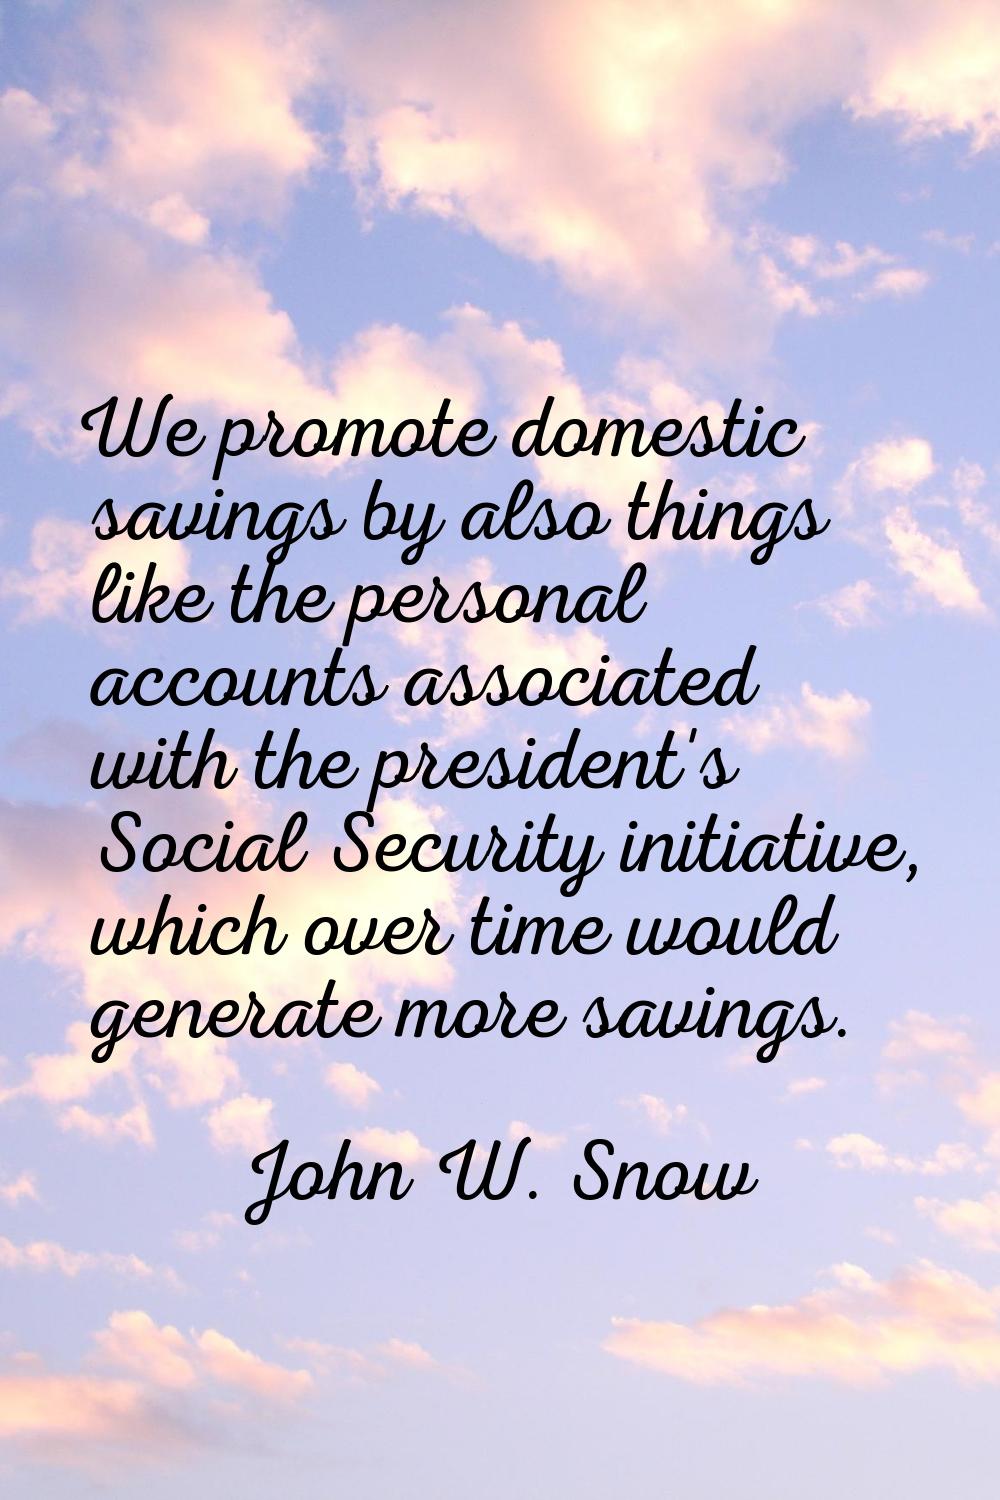 We promote domestic savings by also things like the personal accounts associated with the president